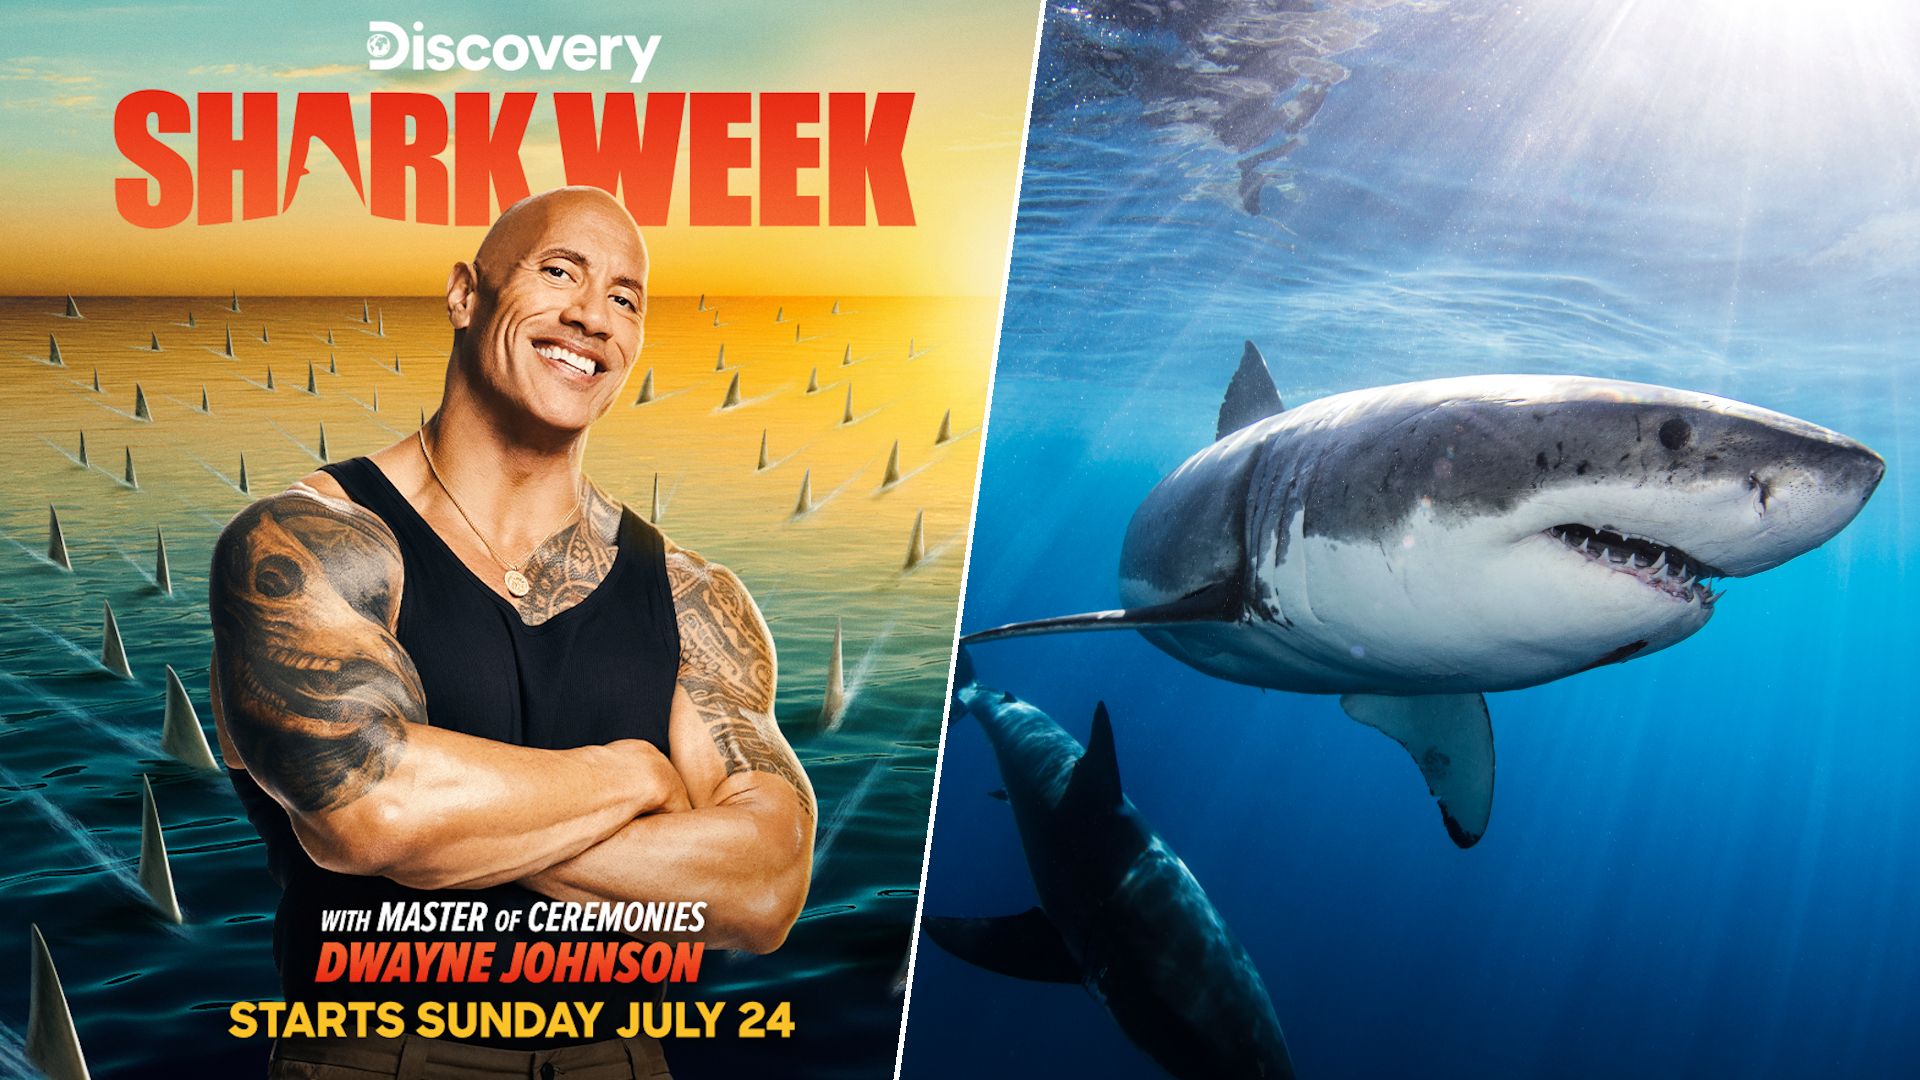 Shark week. Вайт Шарк акула. Акулы в Сиде 2022. Shark week Discovery. Sharks in your mouth this is gonna hurt.